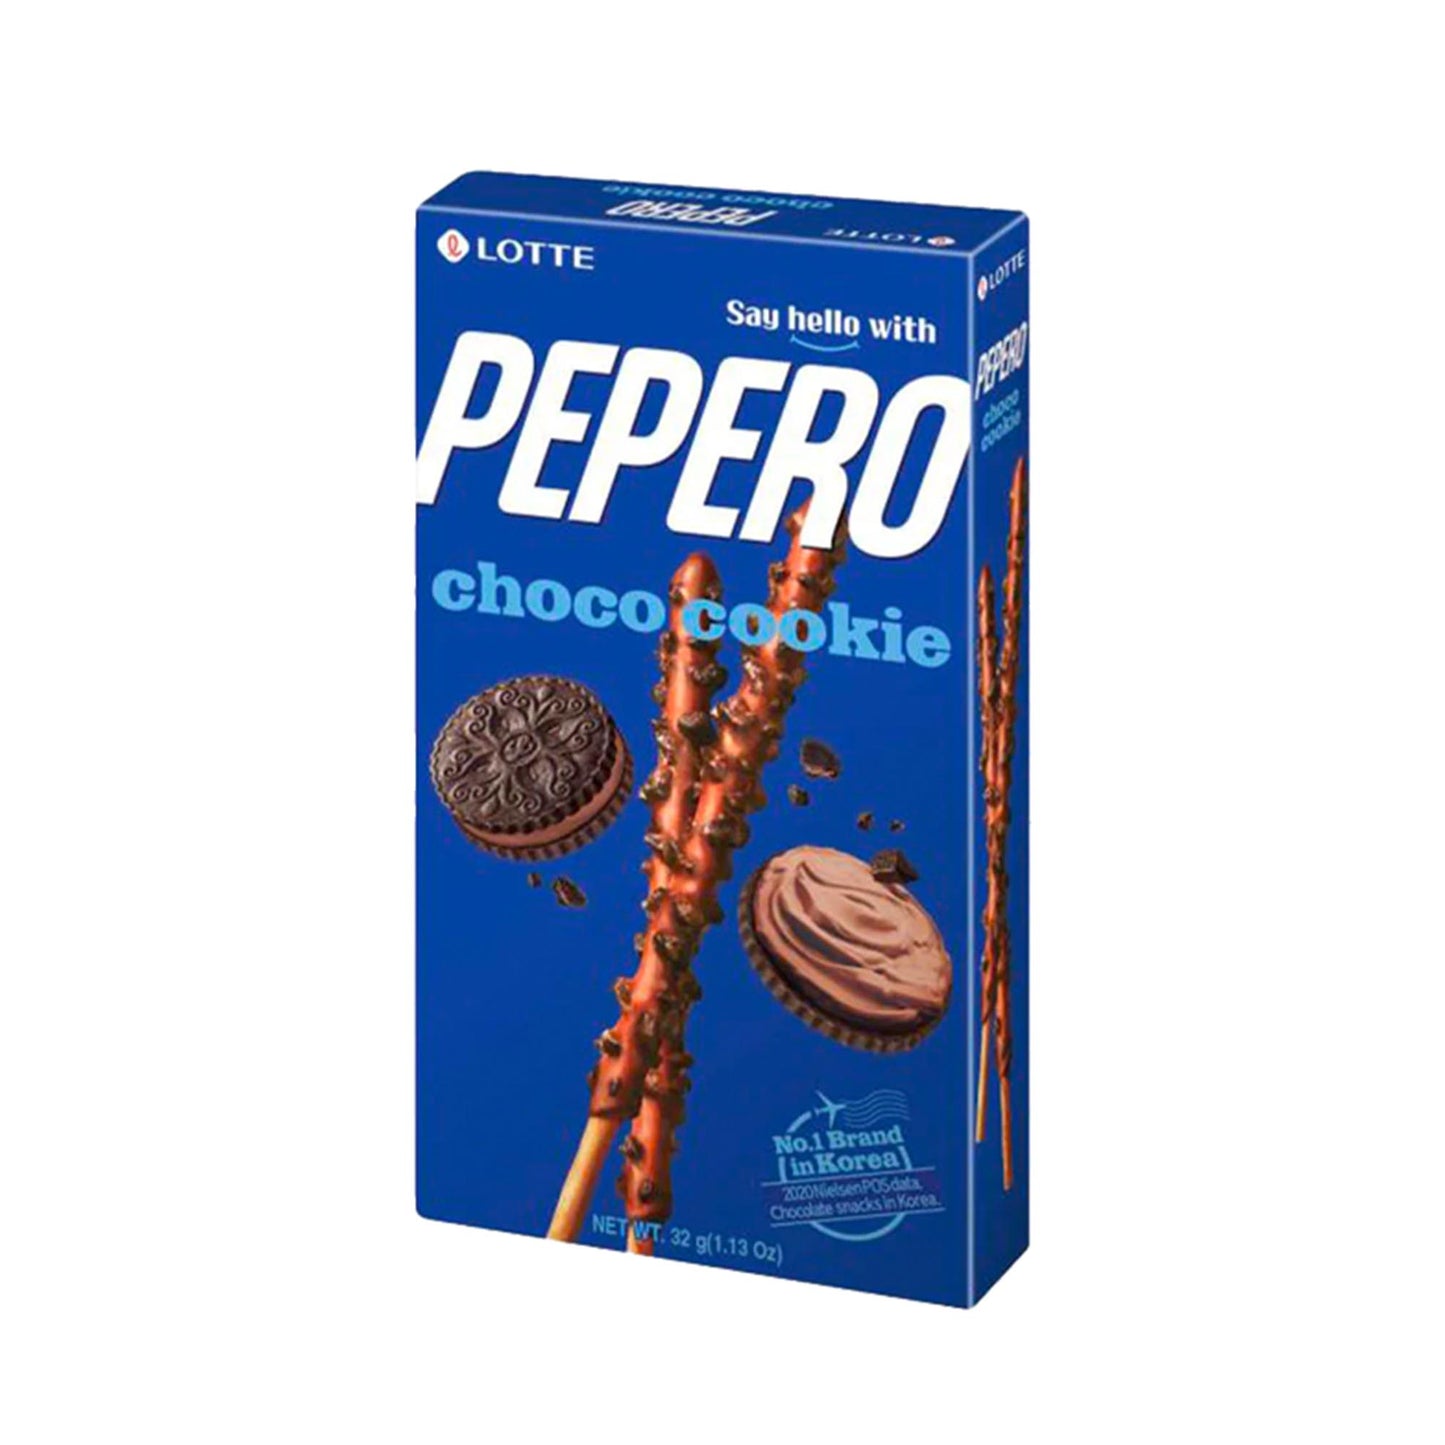 Pepero Biscuit Choco Cookie 32g